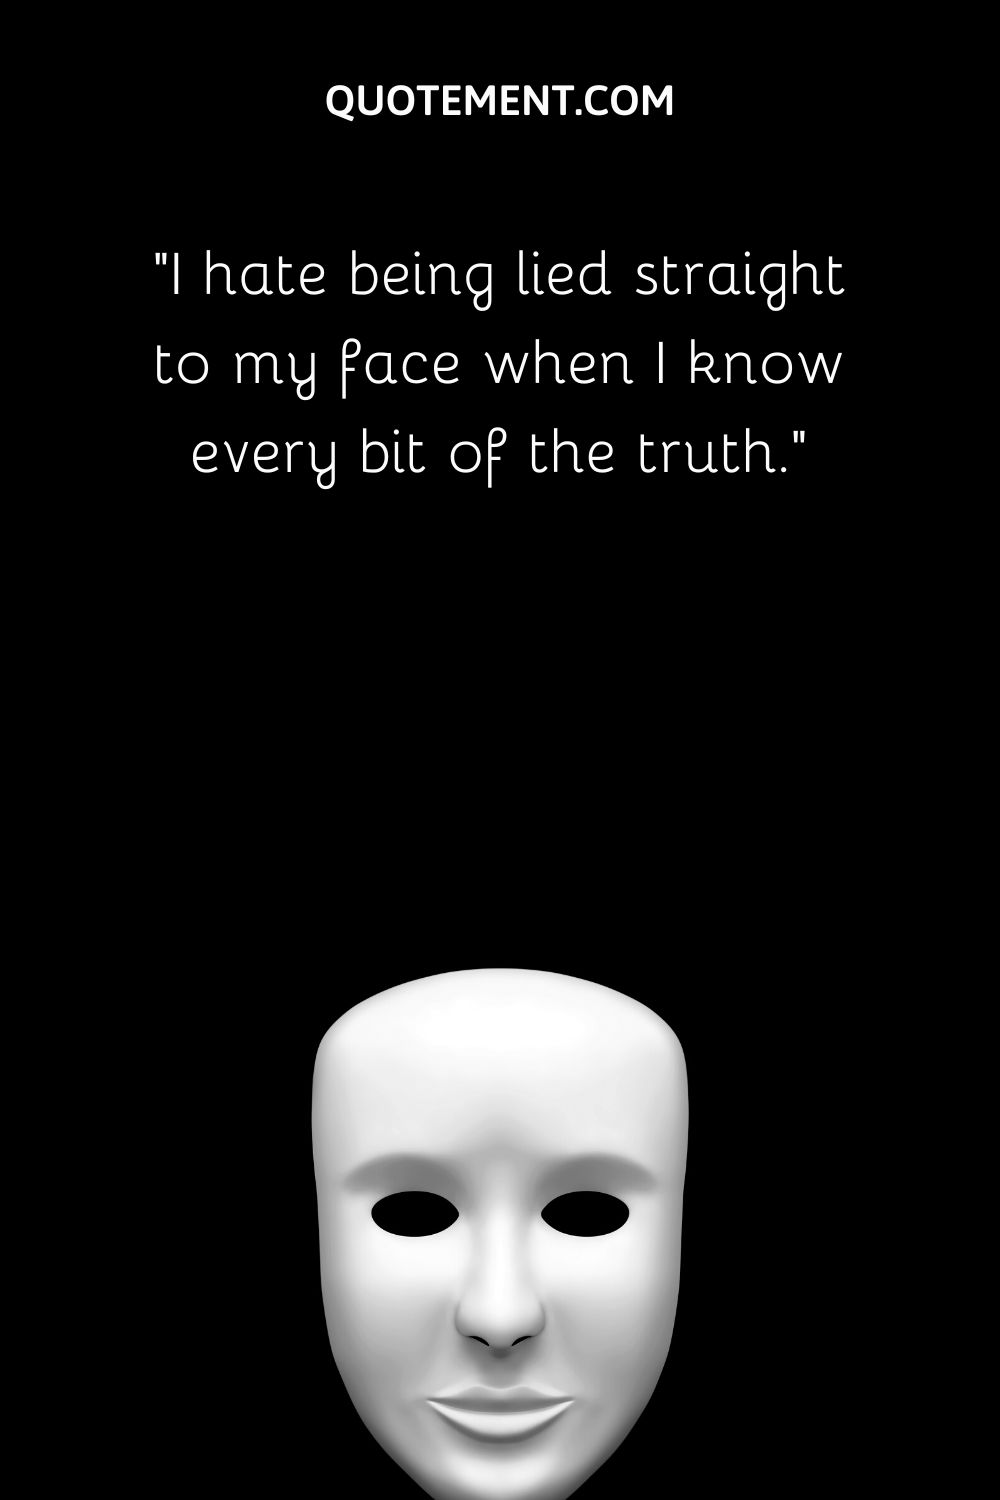 I hate being lied straight to my face when I know every bit of the truth